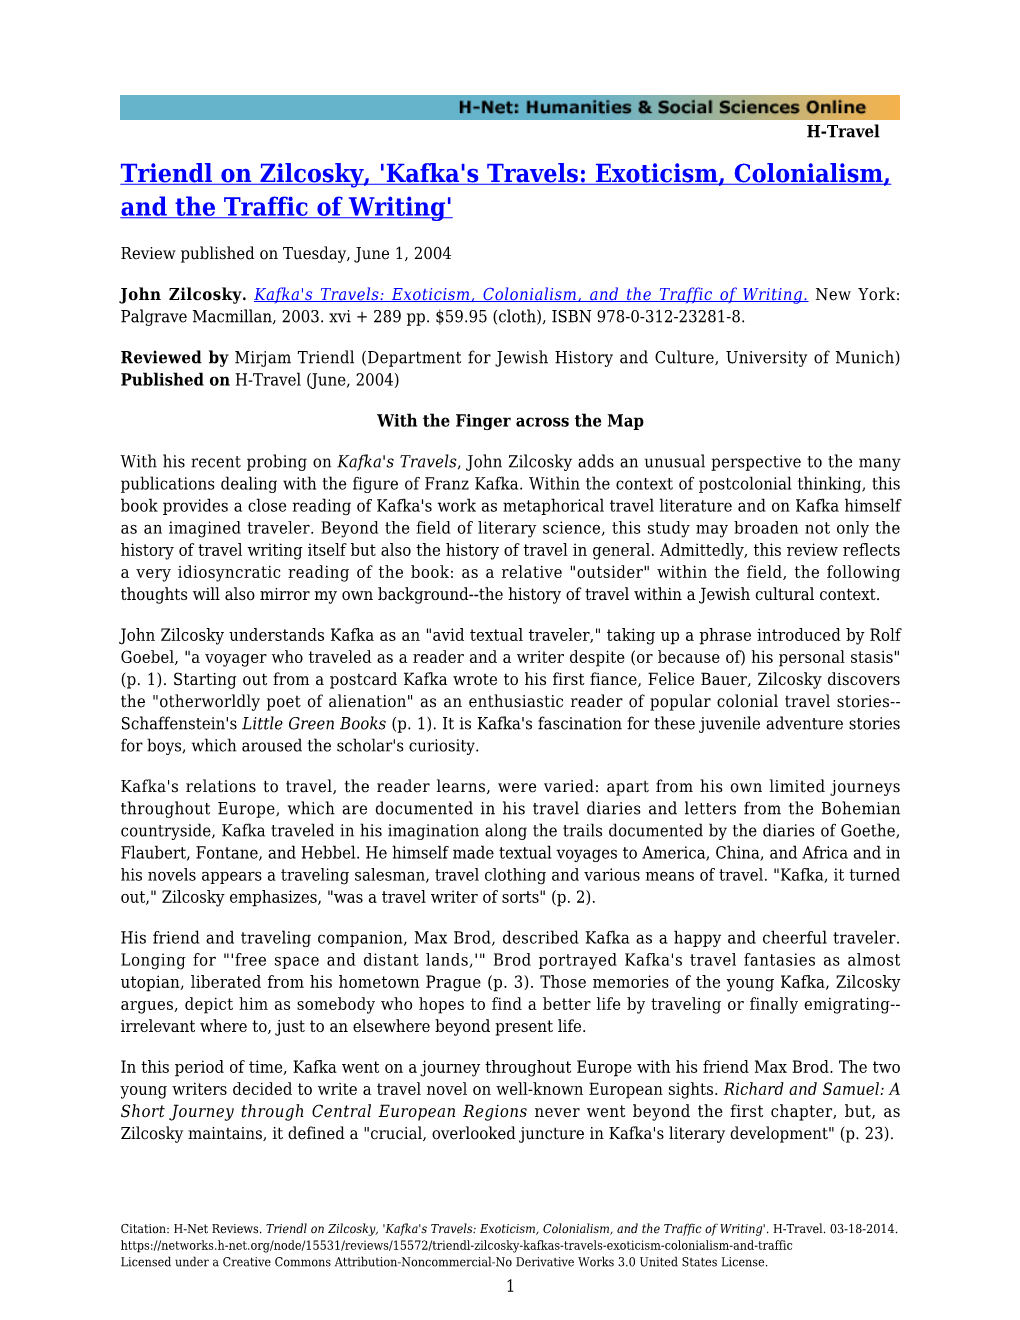 Triendl on Zilcosky, 'Kafka's Travels: Exoticism, Colonialism, and the Traffic of Writing'